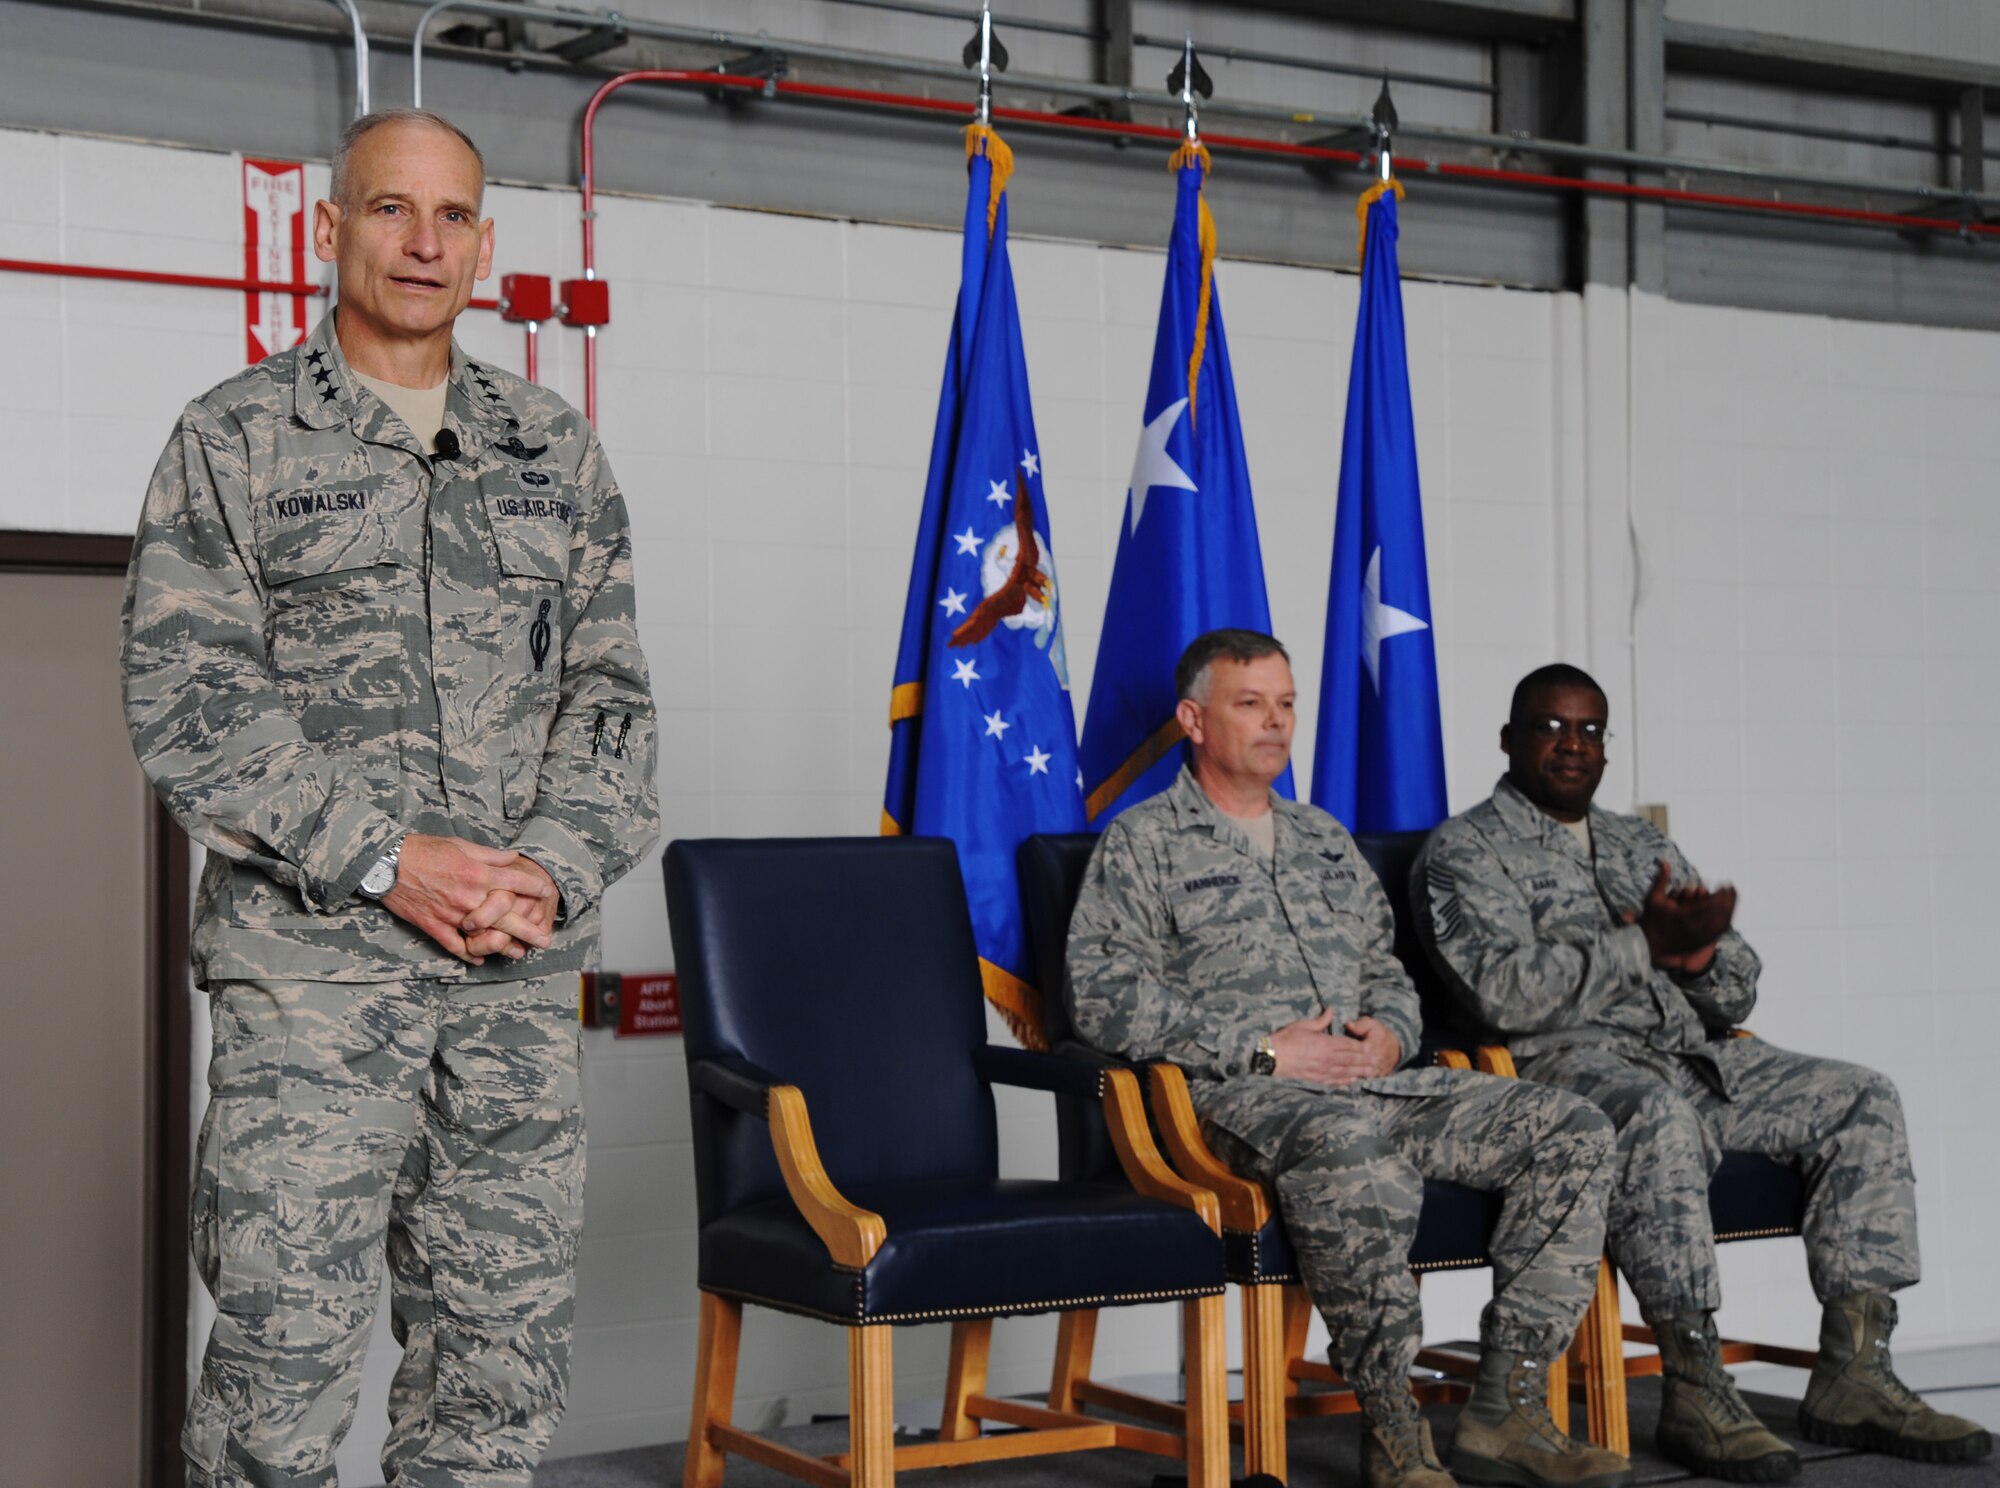 Lt. Gen. James Kowalski, U.S. Strategic Command deputy commander, addresses Team Whiteman during a Omaha Trophy presentation at Whiteman Air Force Base, Mo., April 28, 2014. Kowalski thanked Team Whiteman for all the contributions to the Air Force mission and their dedication to excellence. The 509th Bomb Wing supports USSTRATCOM's strategic deterrence mission by operating and maintaining B-2 Spirit bombers to deter strategic threats from adversaries and assure our allies of our commitment to their security. (U.S. Air Force photo by Senior Airman Bryan Crane/Released)